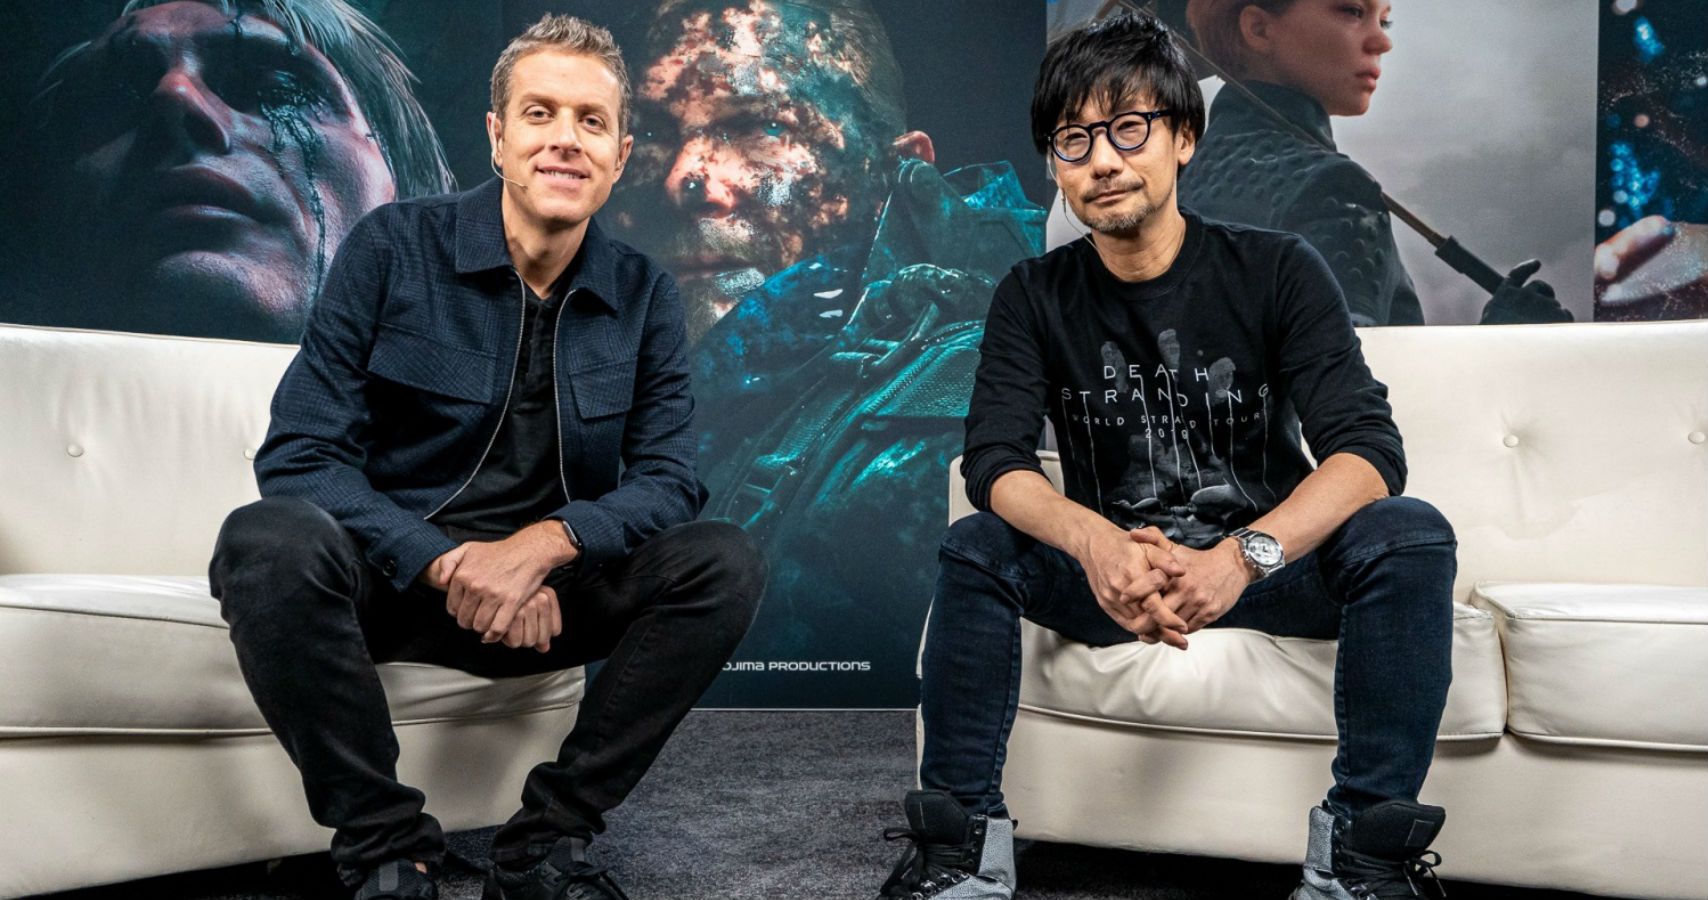 Kojima Productions Teases "Exciting Updates" On Its Social Channels Tomorrow